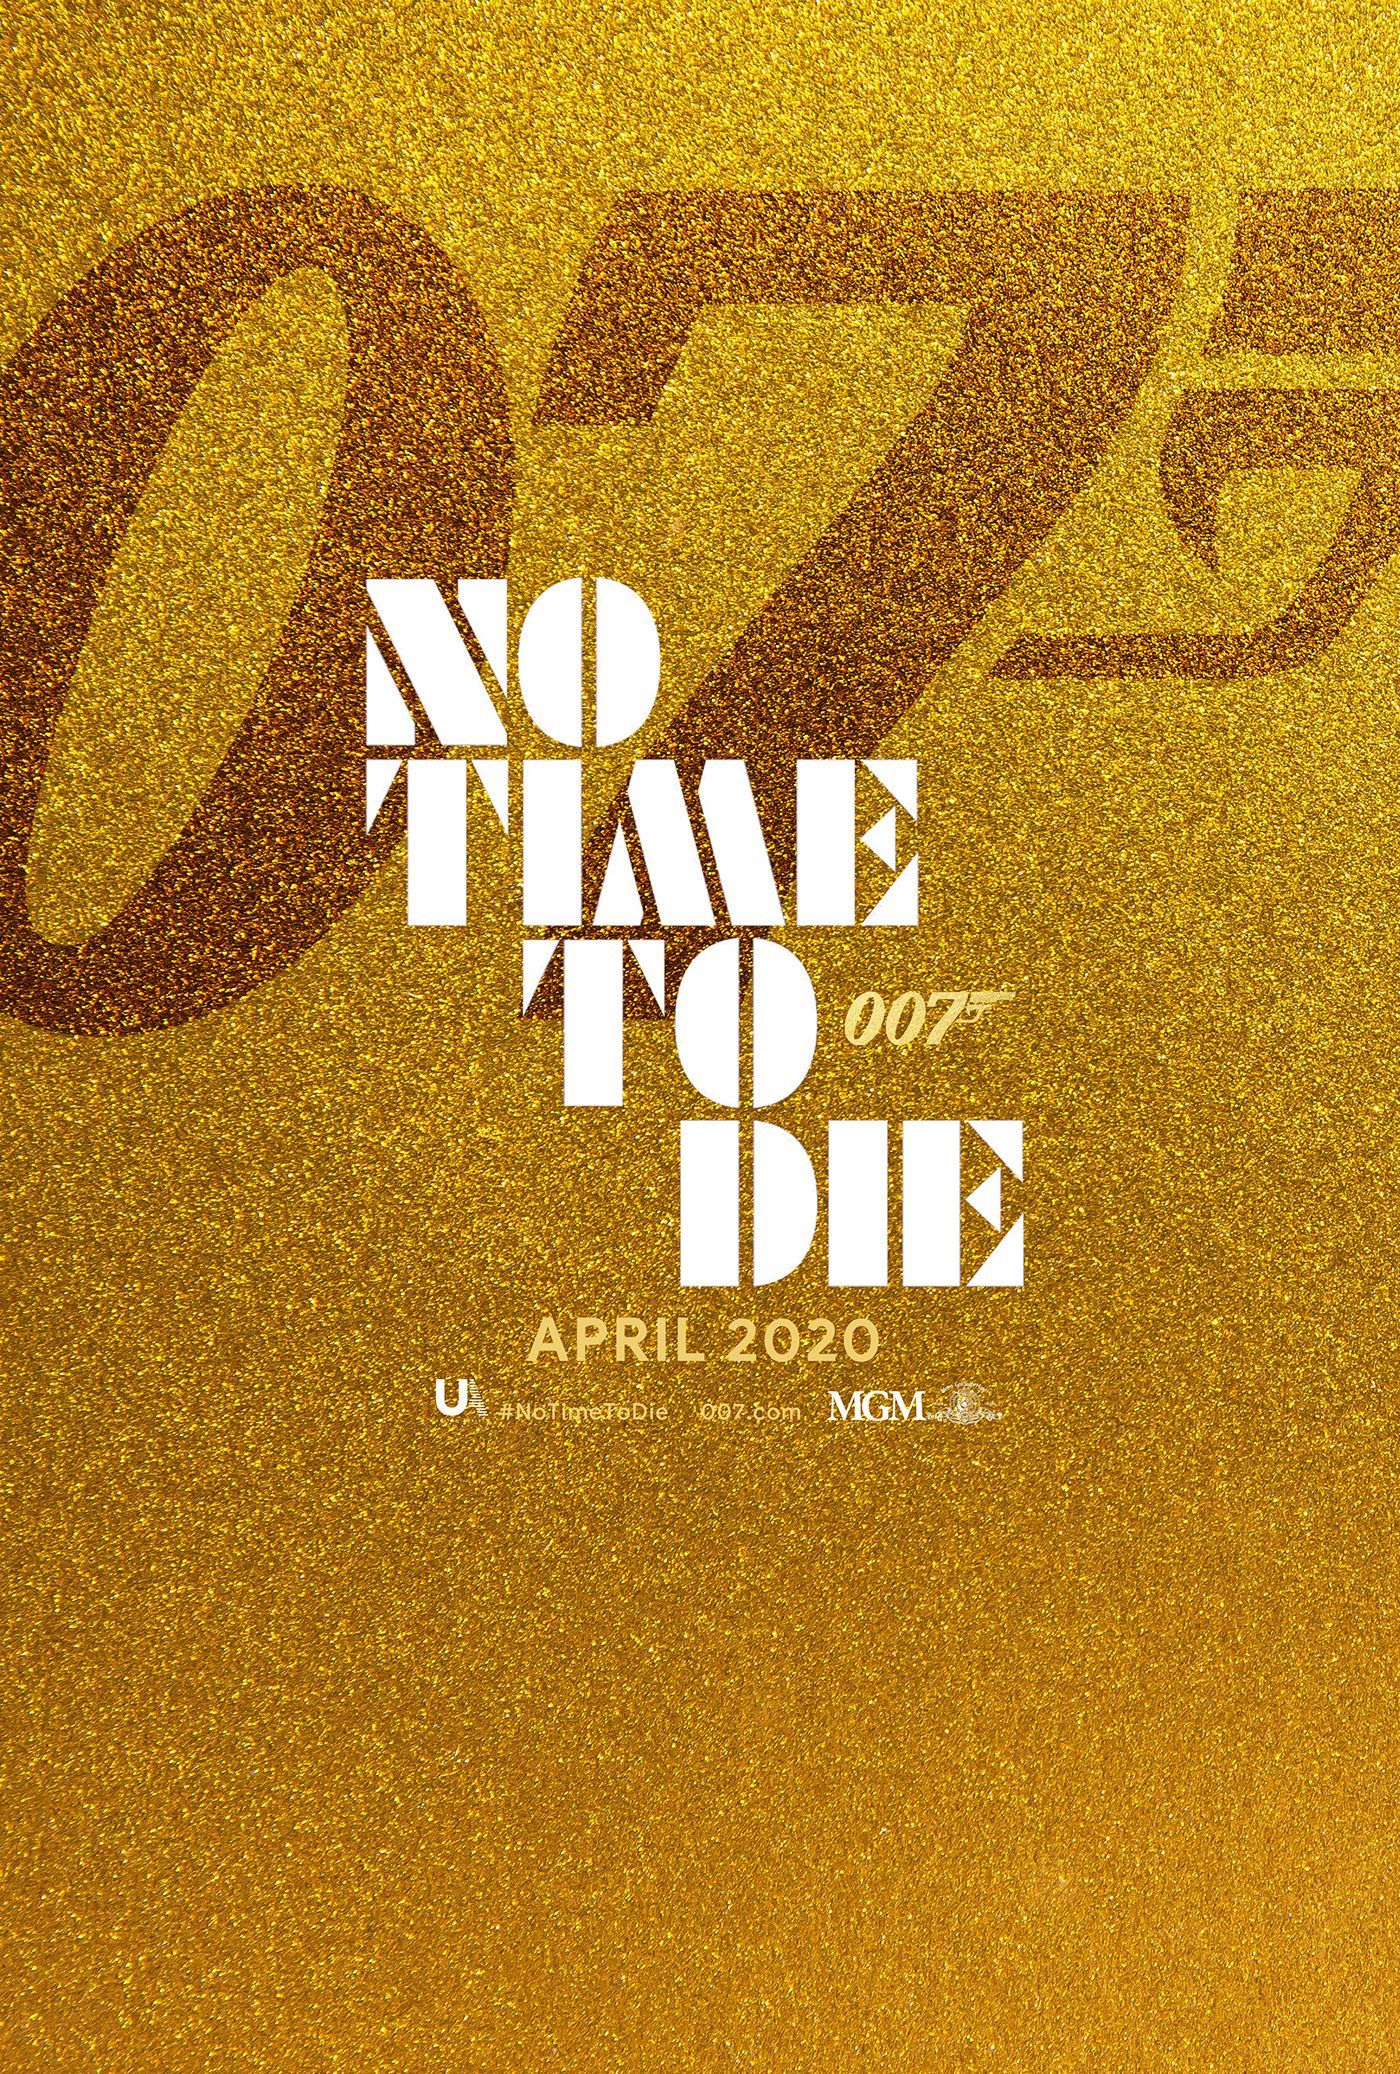 James Bond 007: No Time to Die. Poster Design in 2020